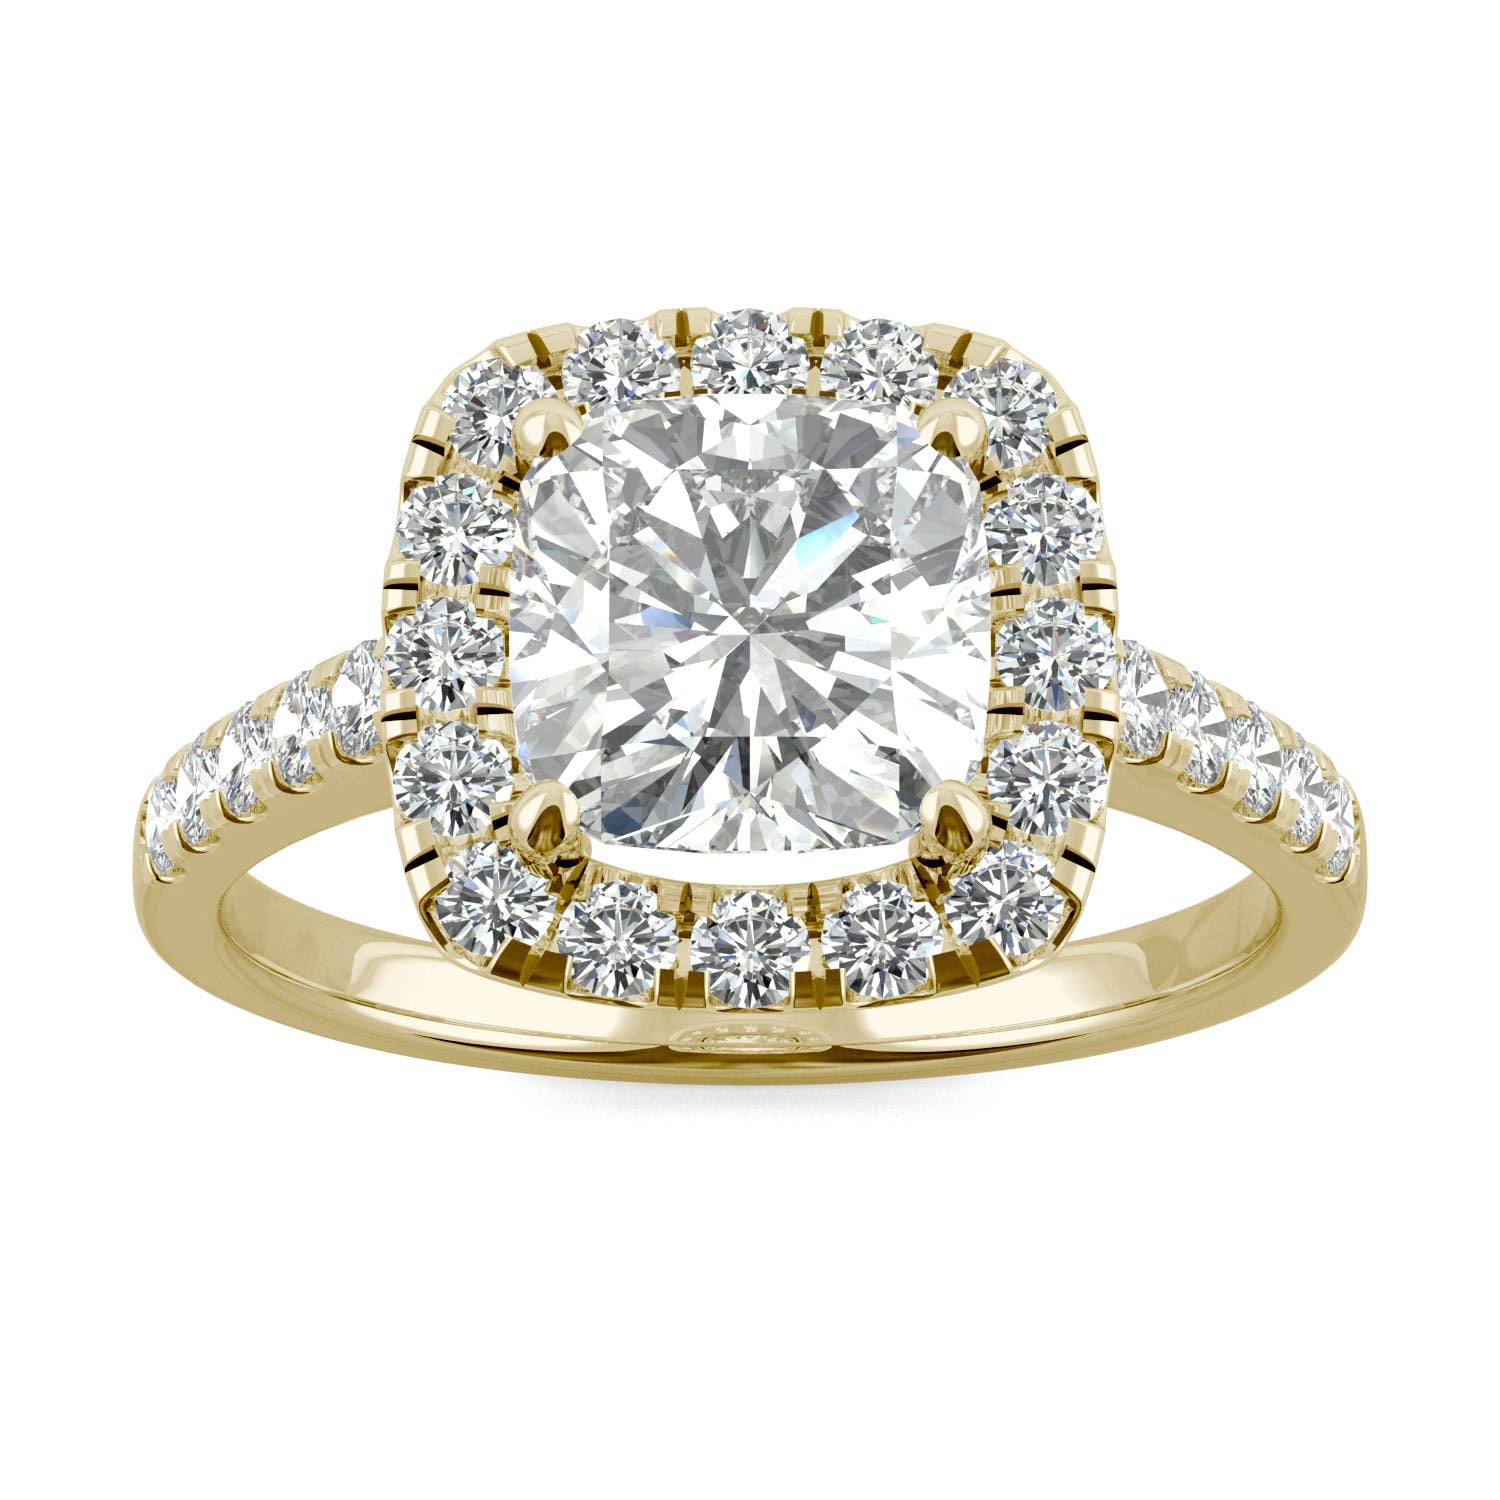 2.59 CTW DEW Cushion Forever One™ Moissanite Halo Engagement Ring